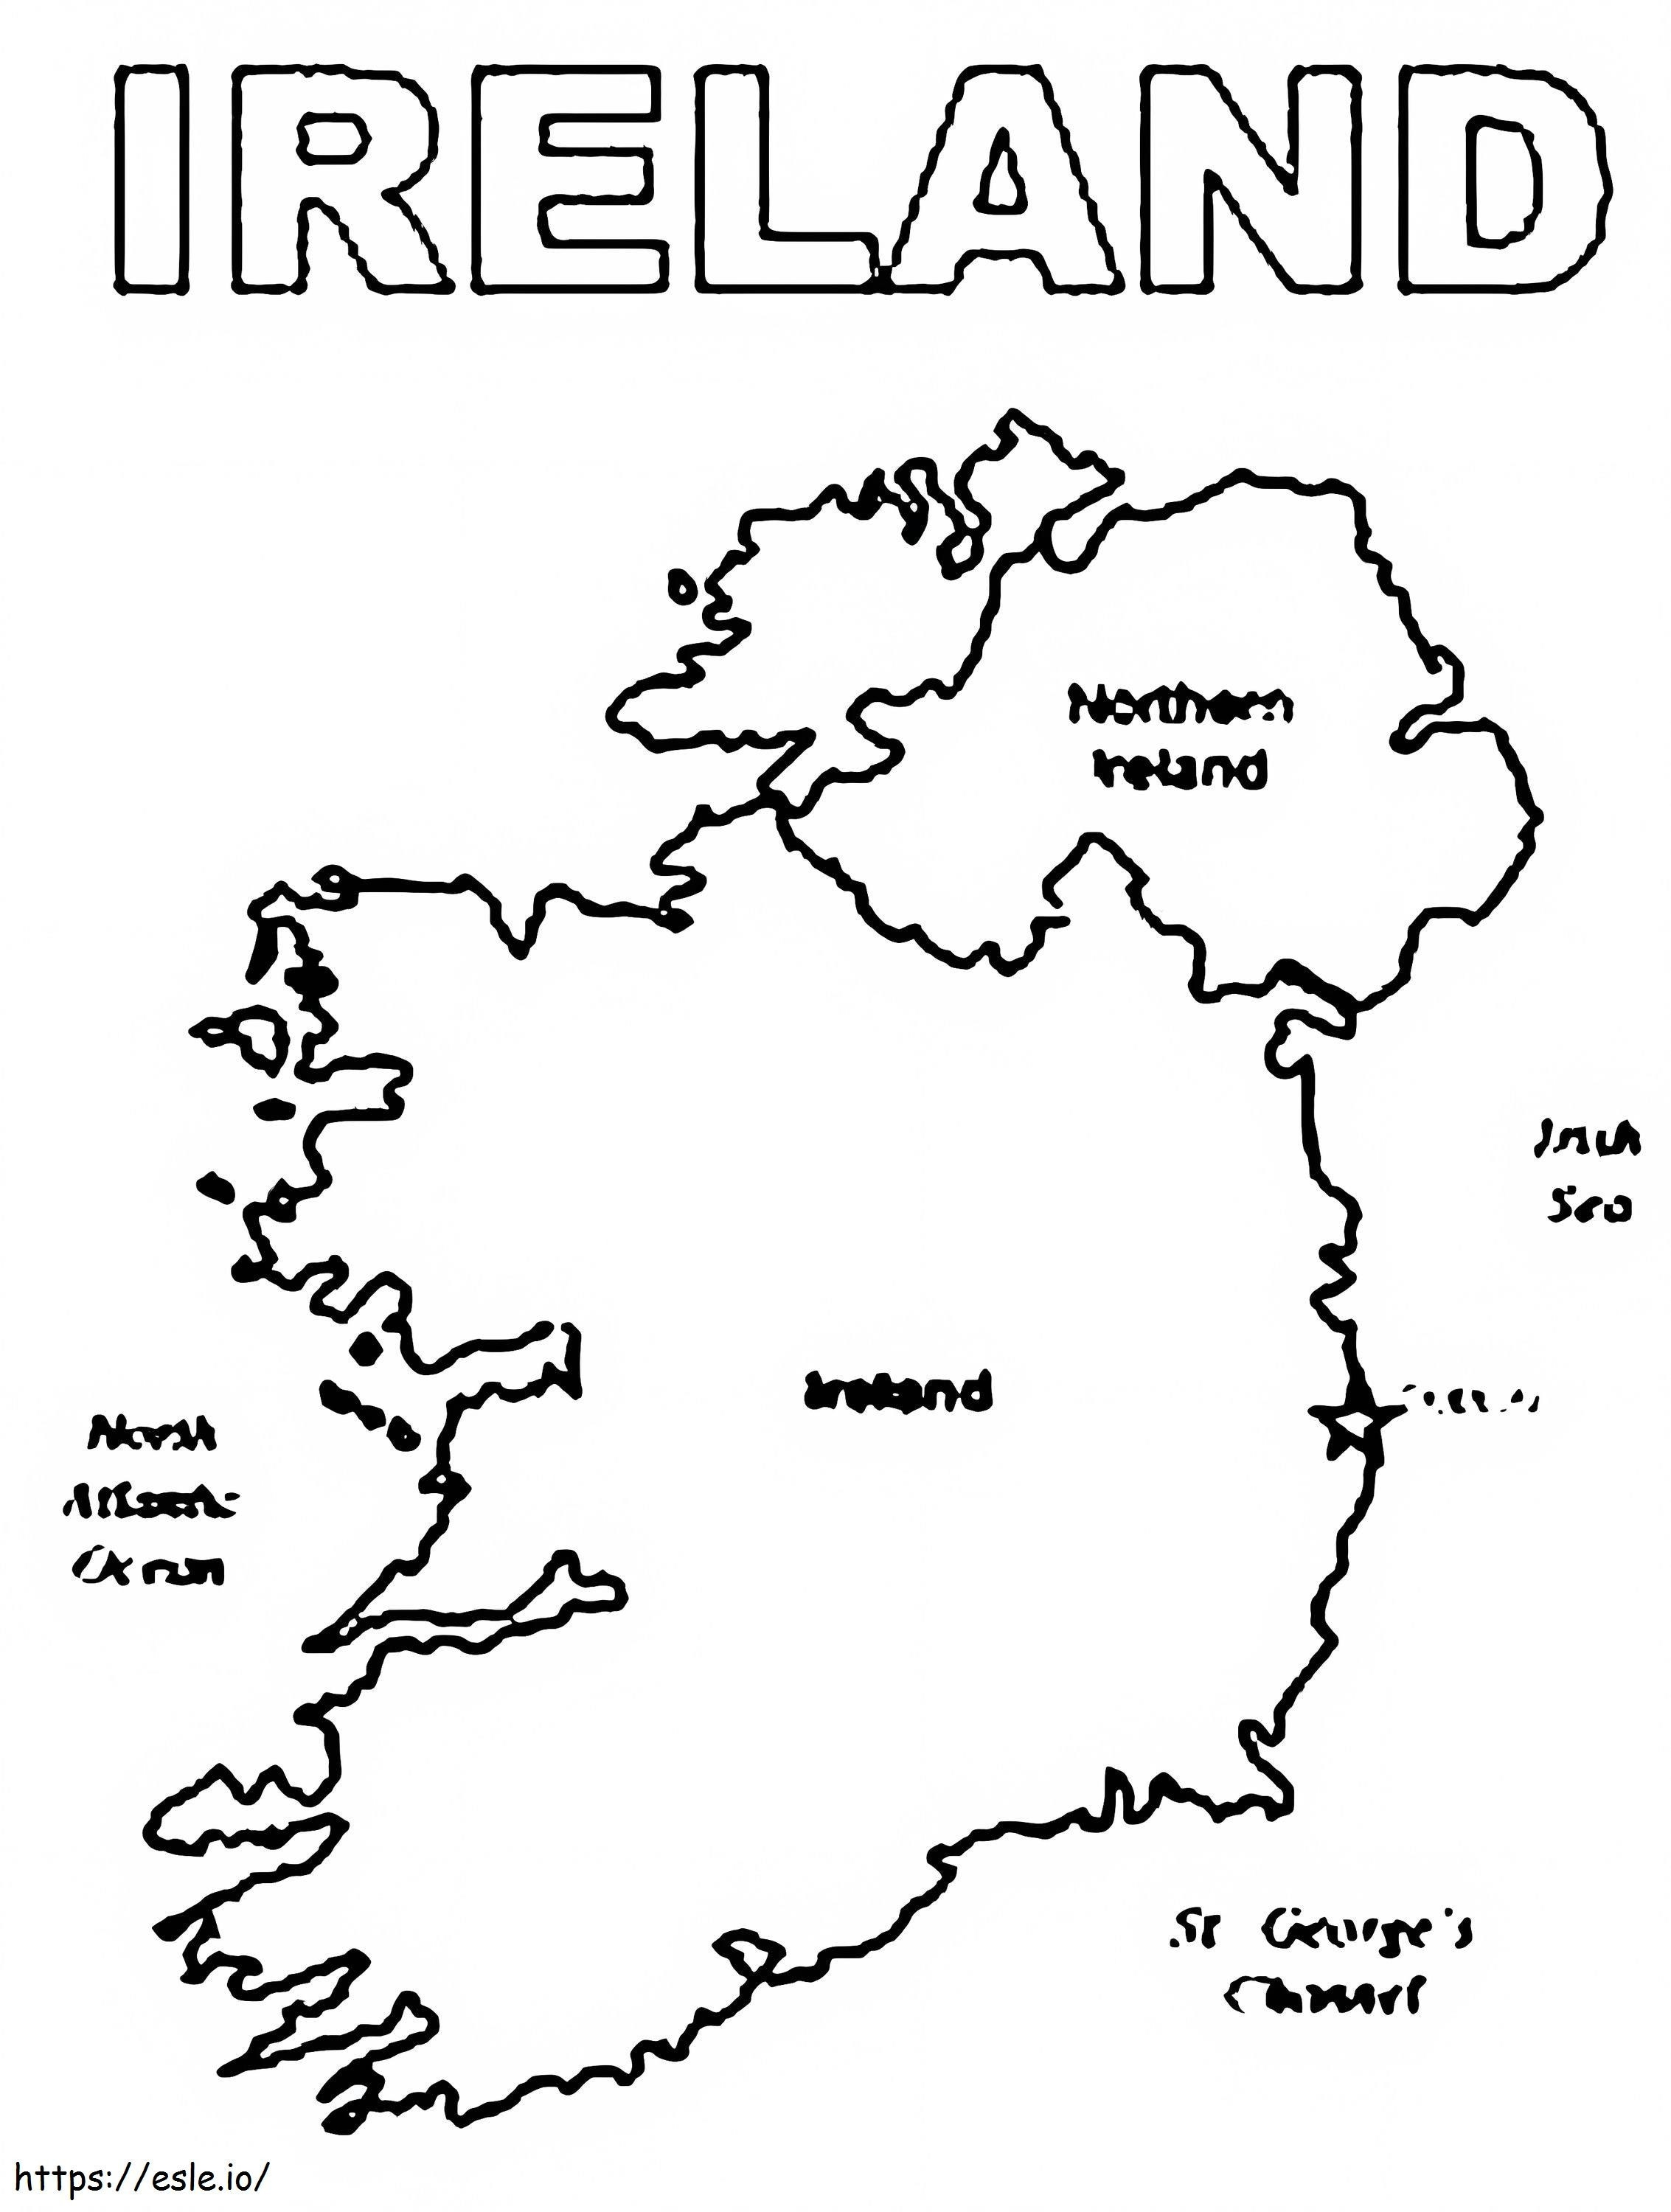 Irelands Map coloring page